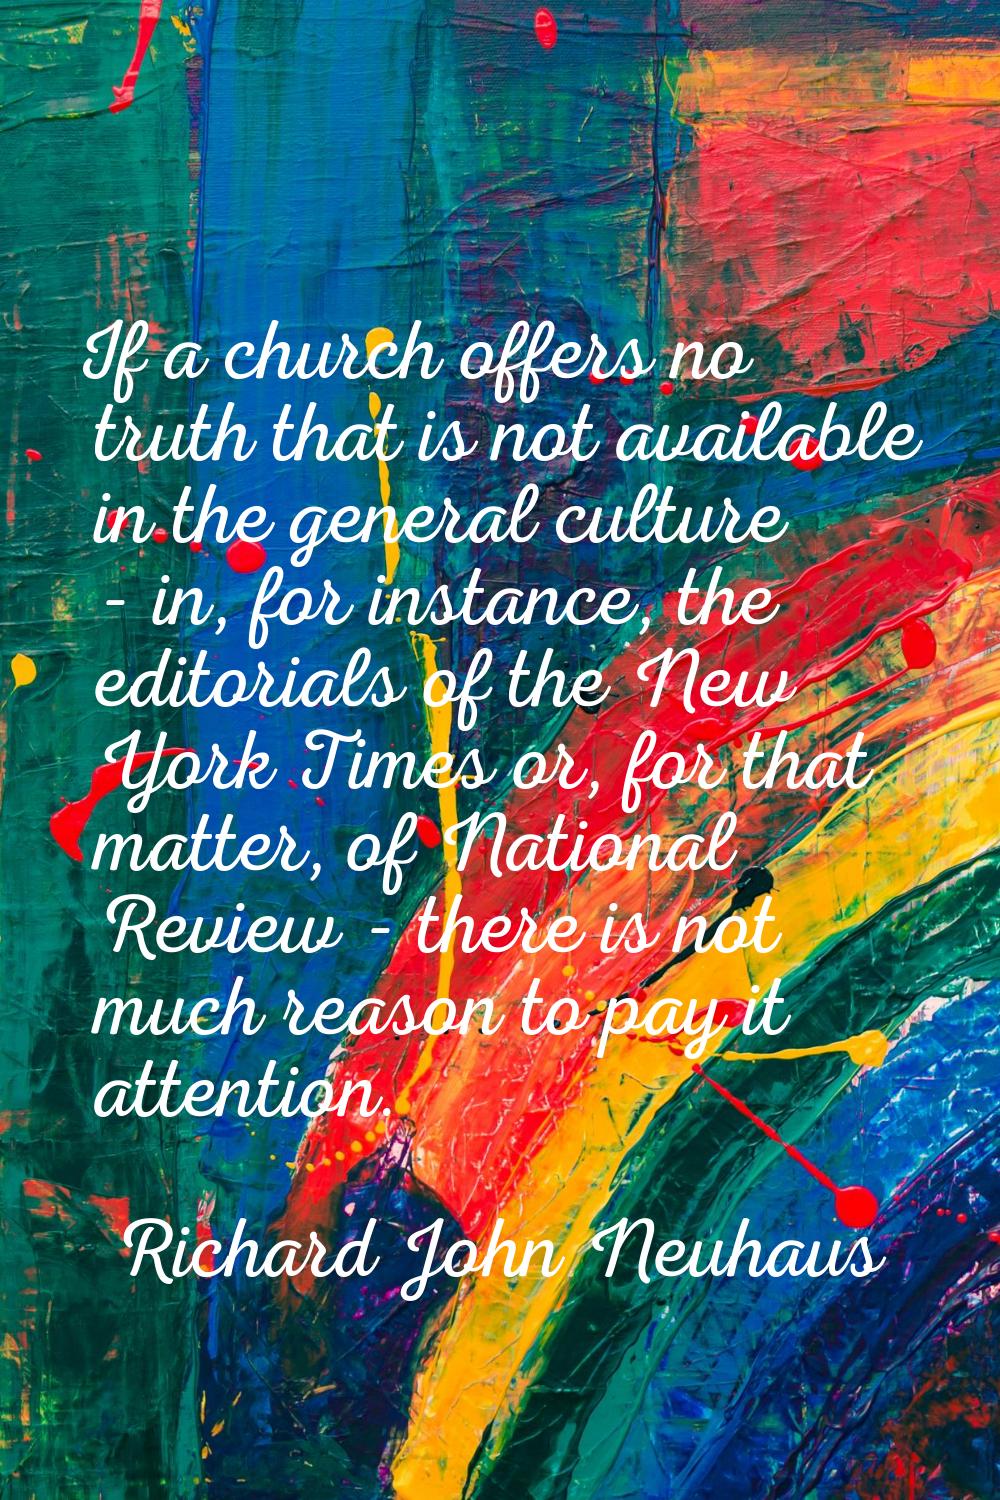 If a church offers no truth that is not available in the general culture - in, for instance, the ed